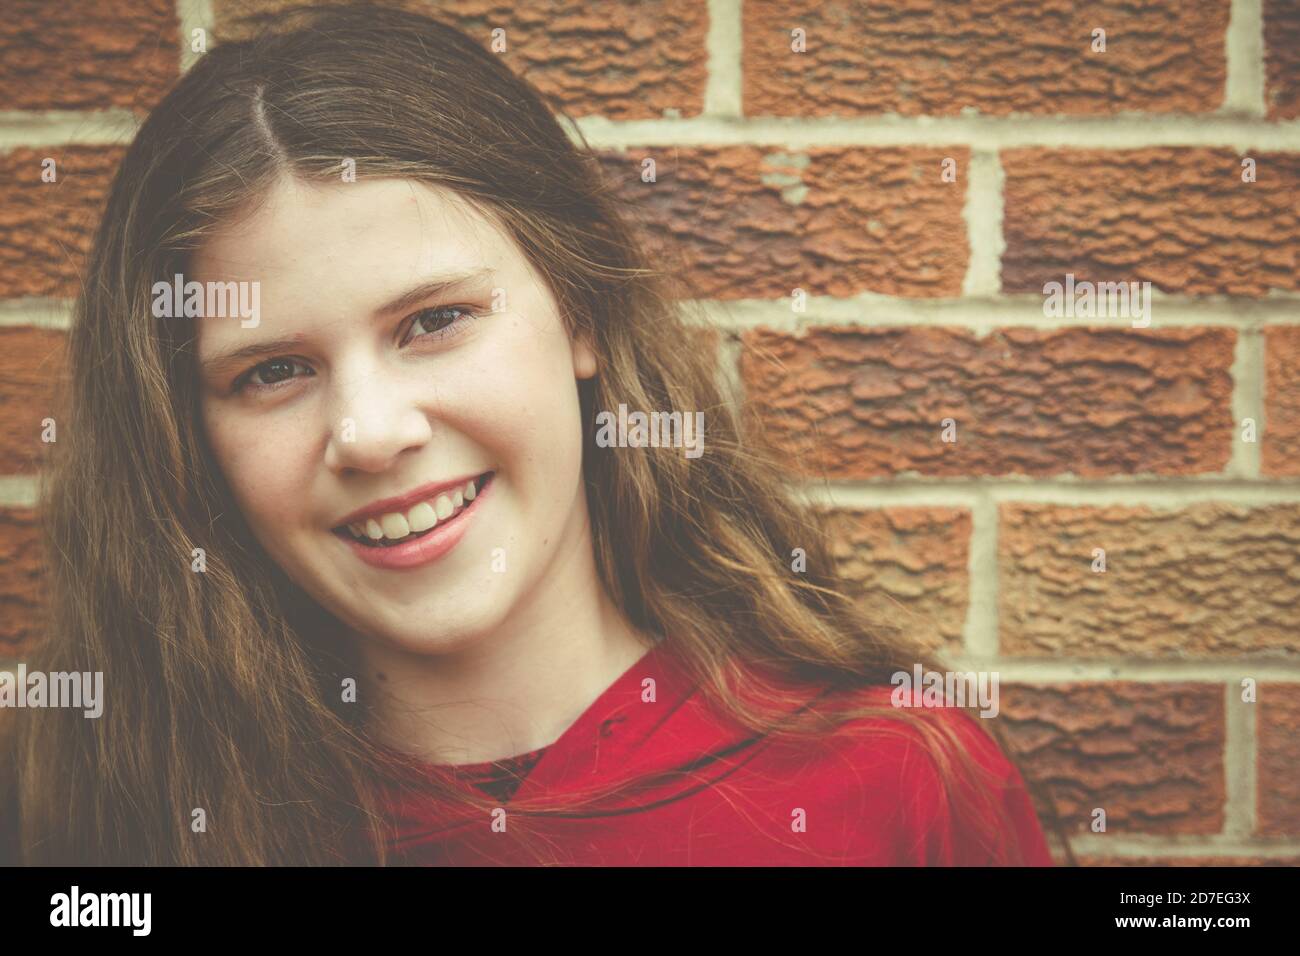 Beautiful natural portrait of teenage girl with long brown hair looking at camera with smile showing teeth against brick wall Stock Photo